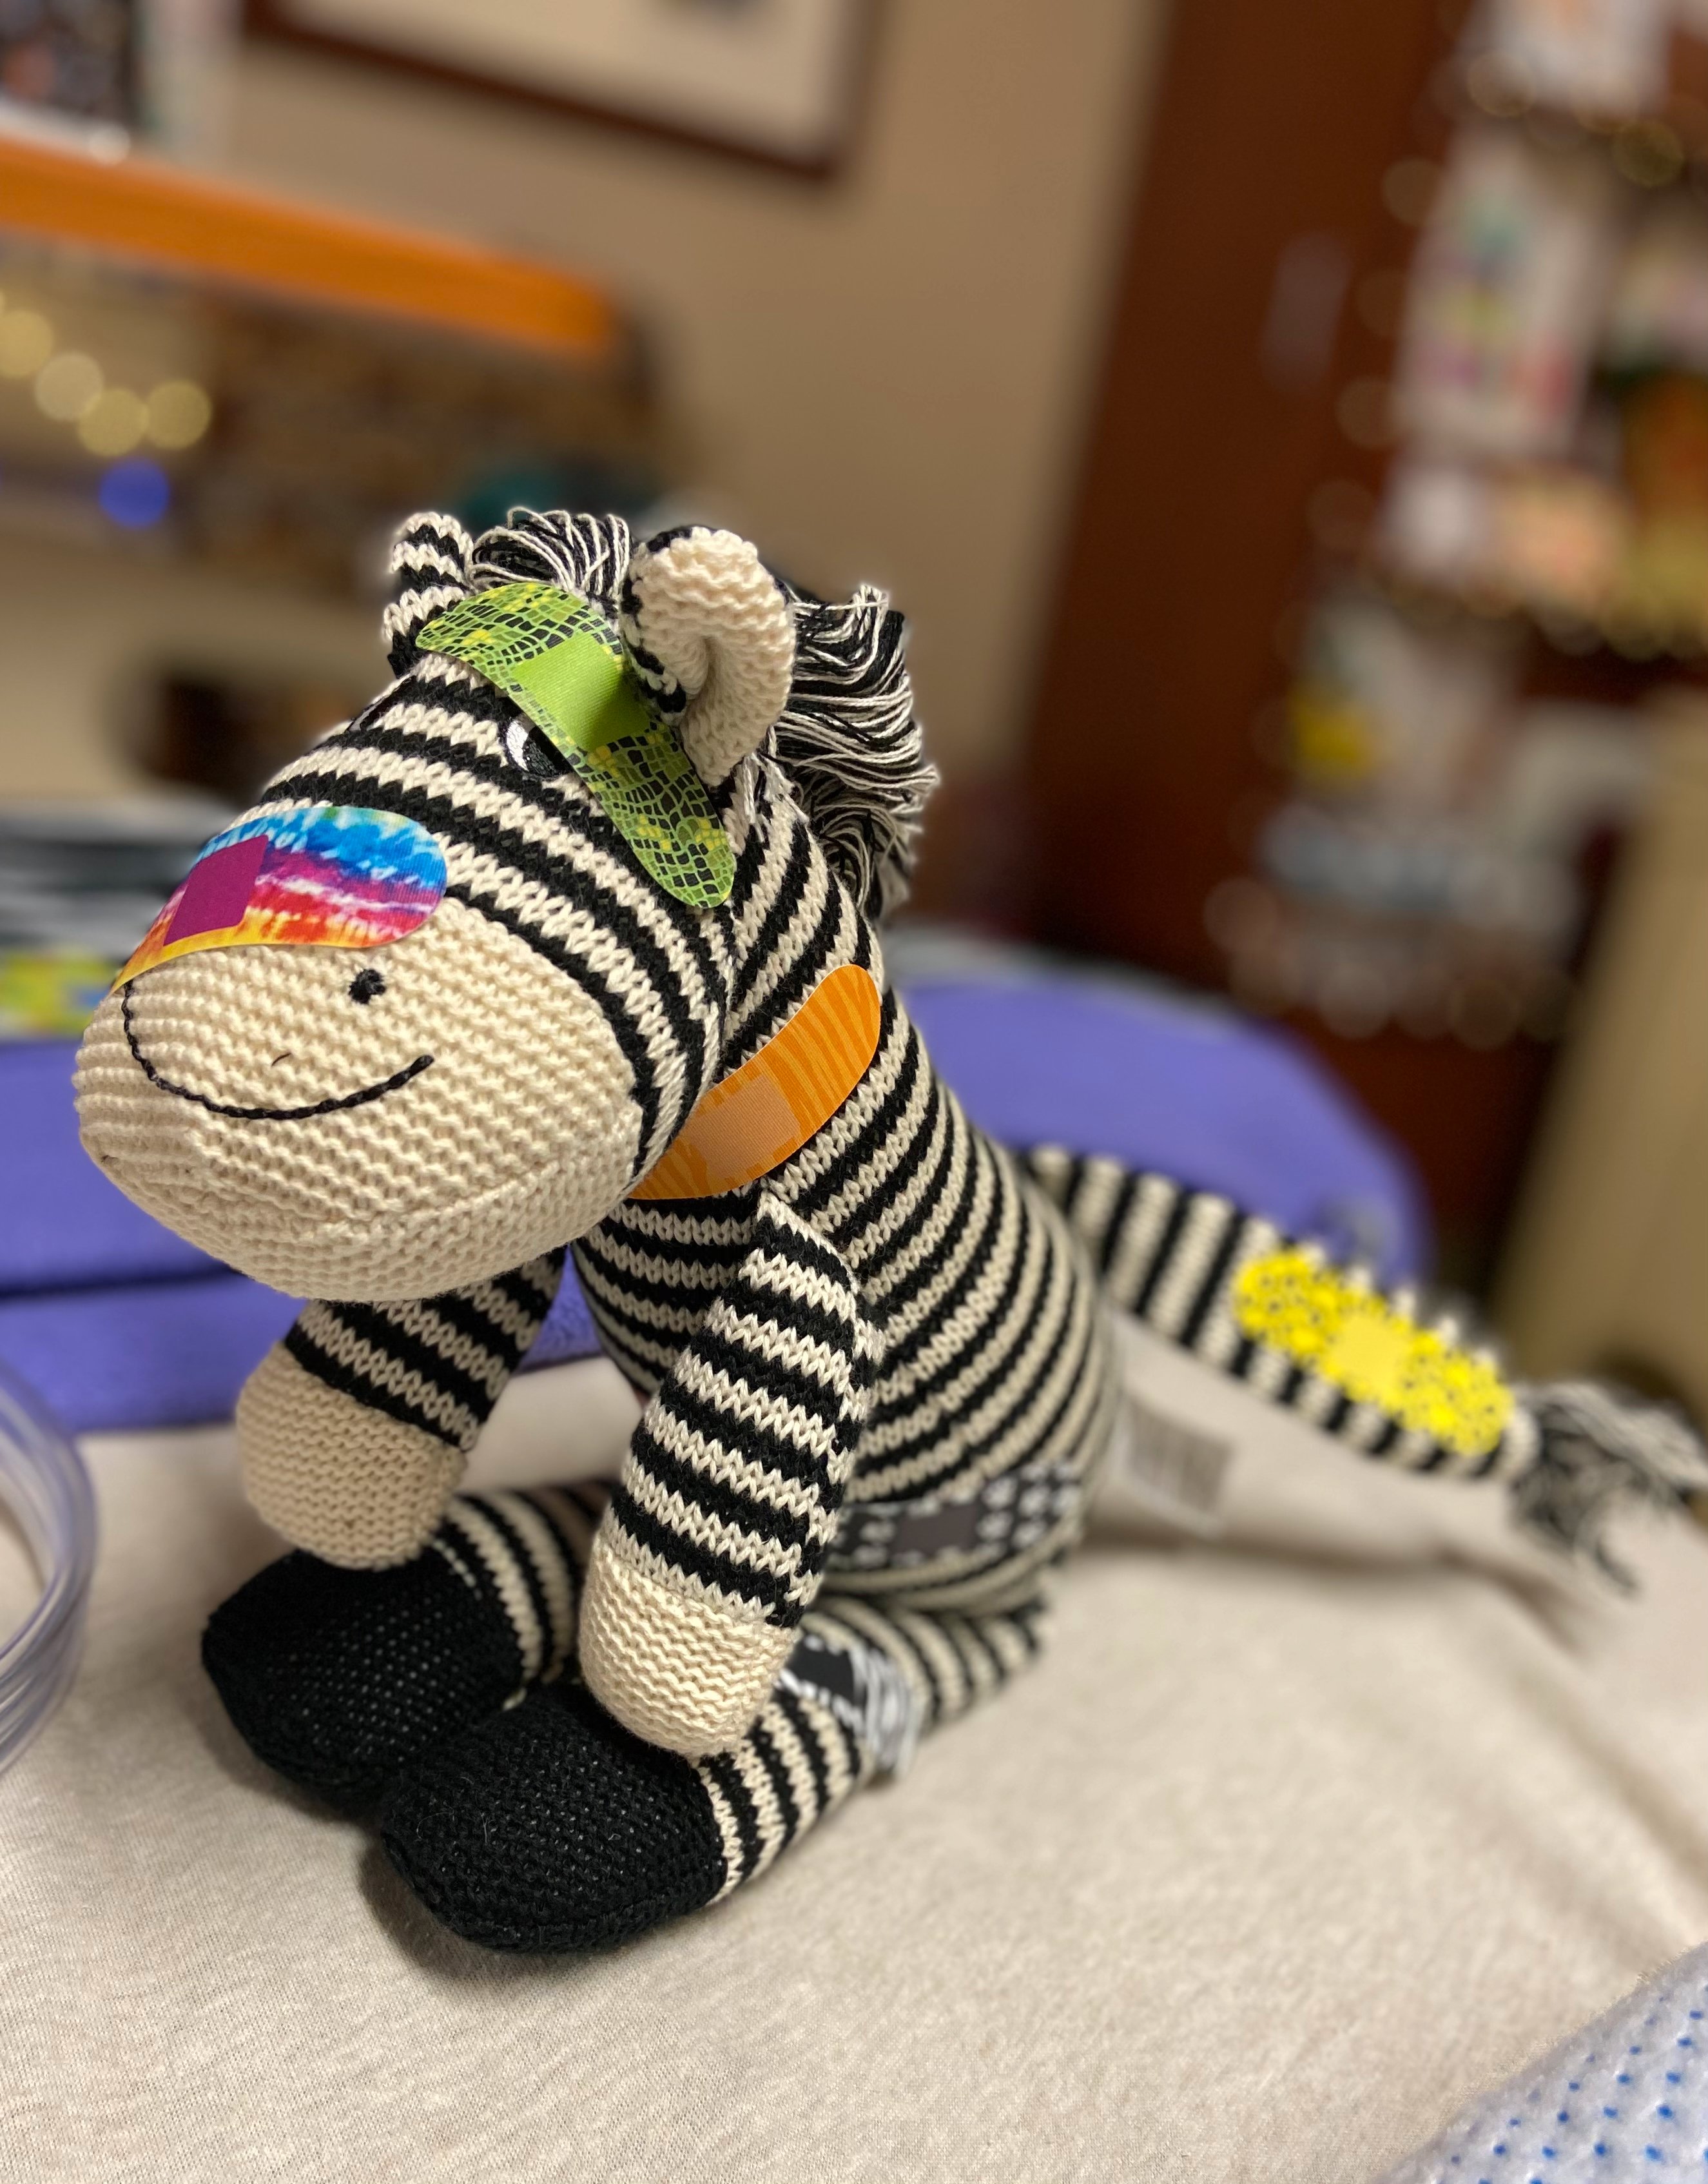 My (unnamed) adorable zebra :)